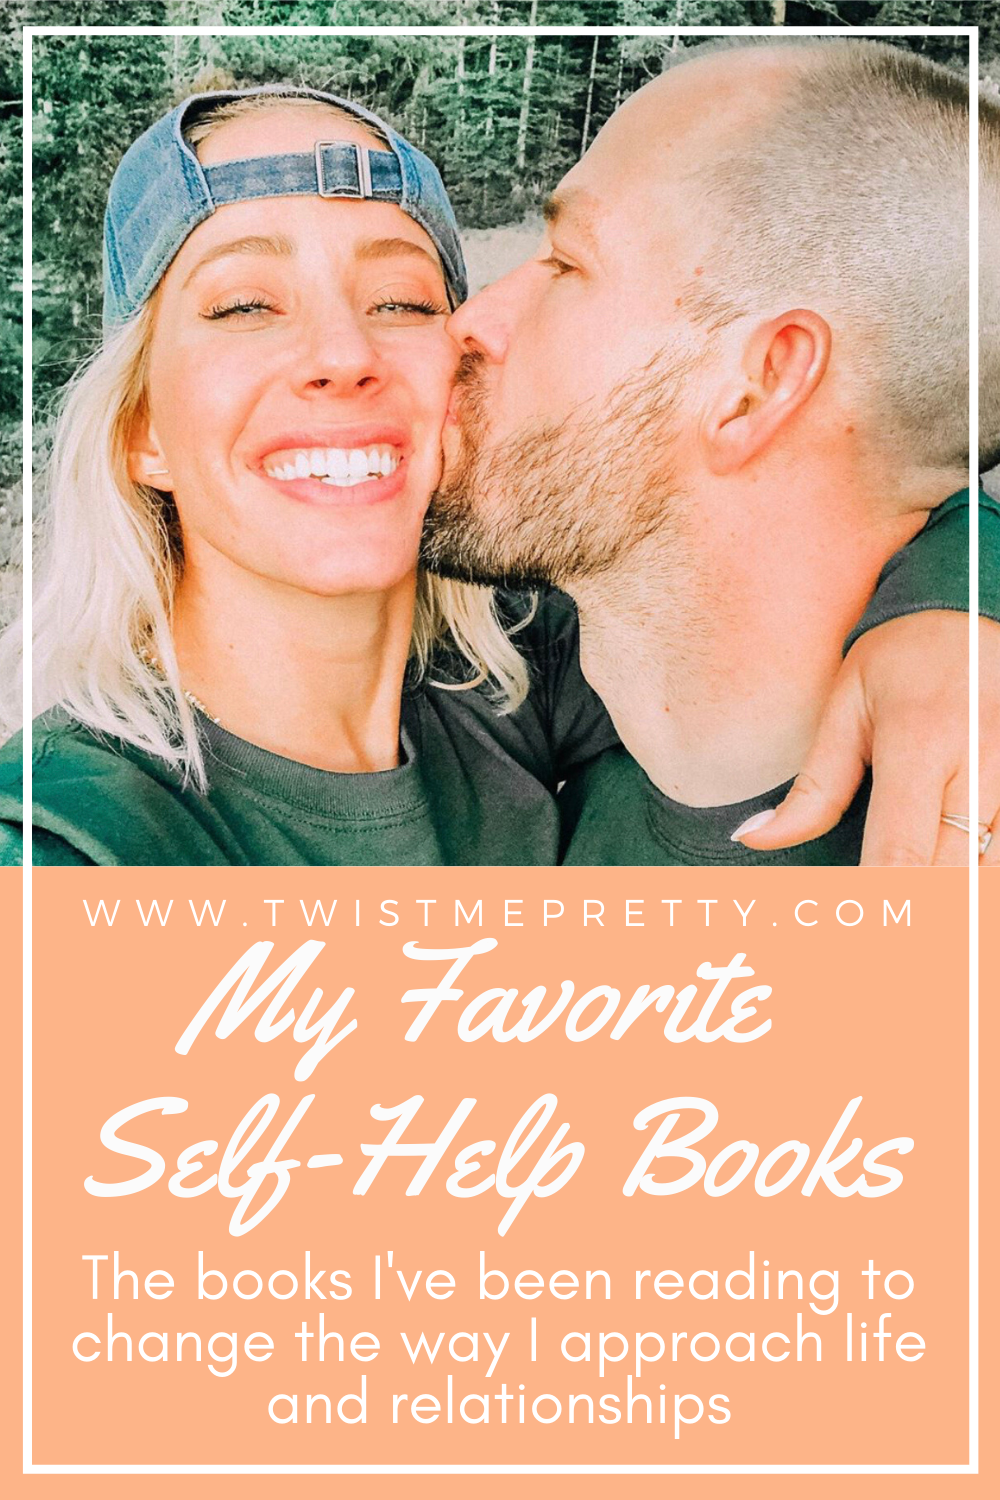 My favorite self-help books. The books I've been reading to change the way I approach life and relationships. www.twistmepretty.com